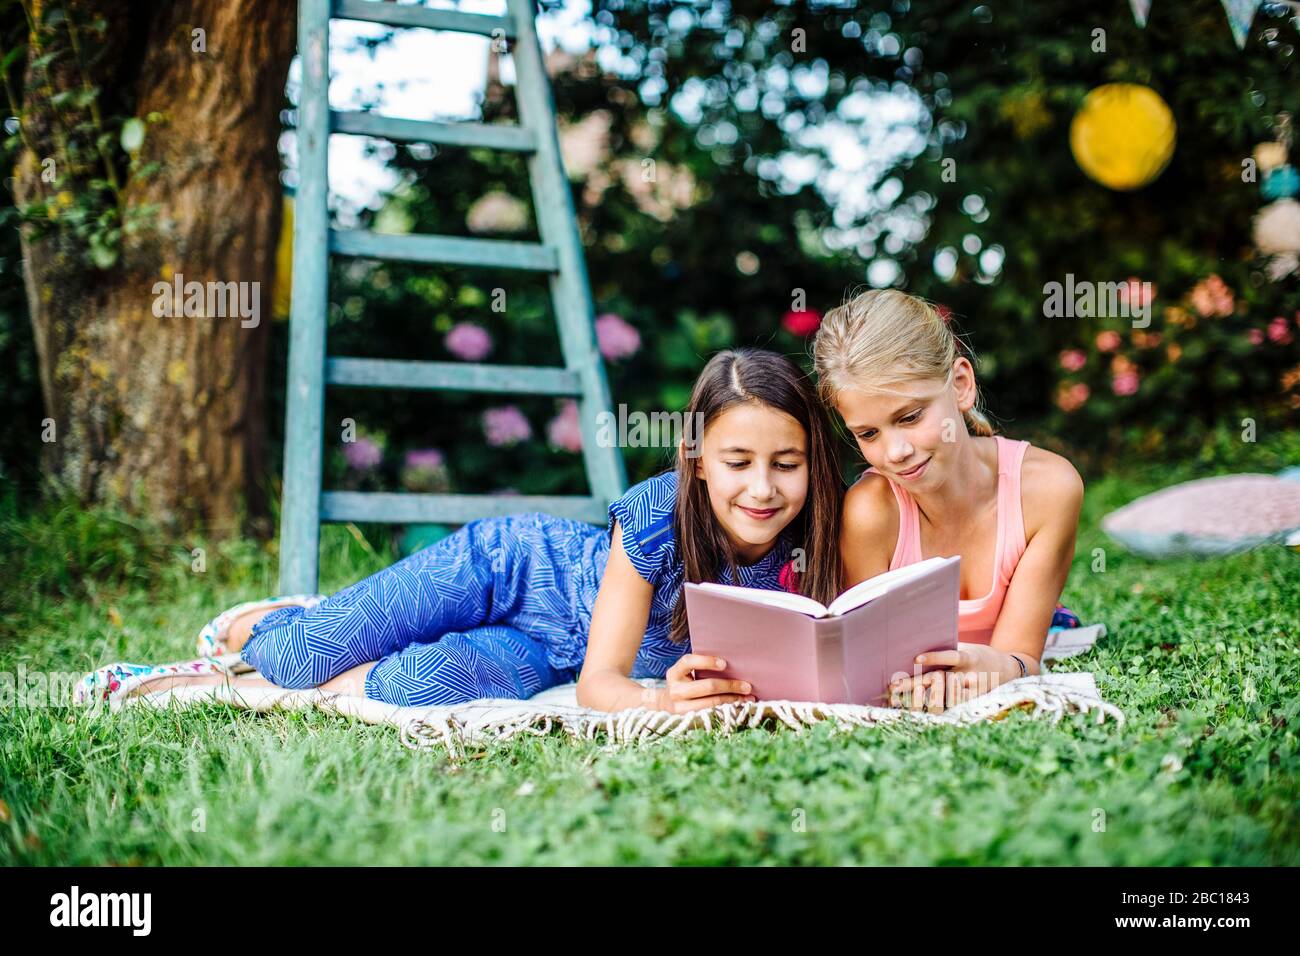 Smiling girls reading a book in garden together Stock Photo